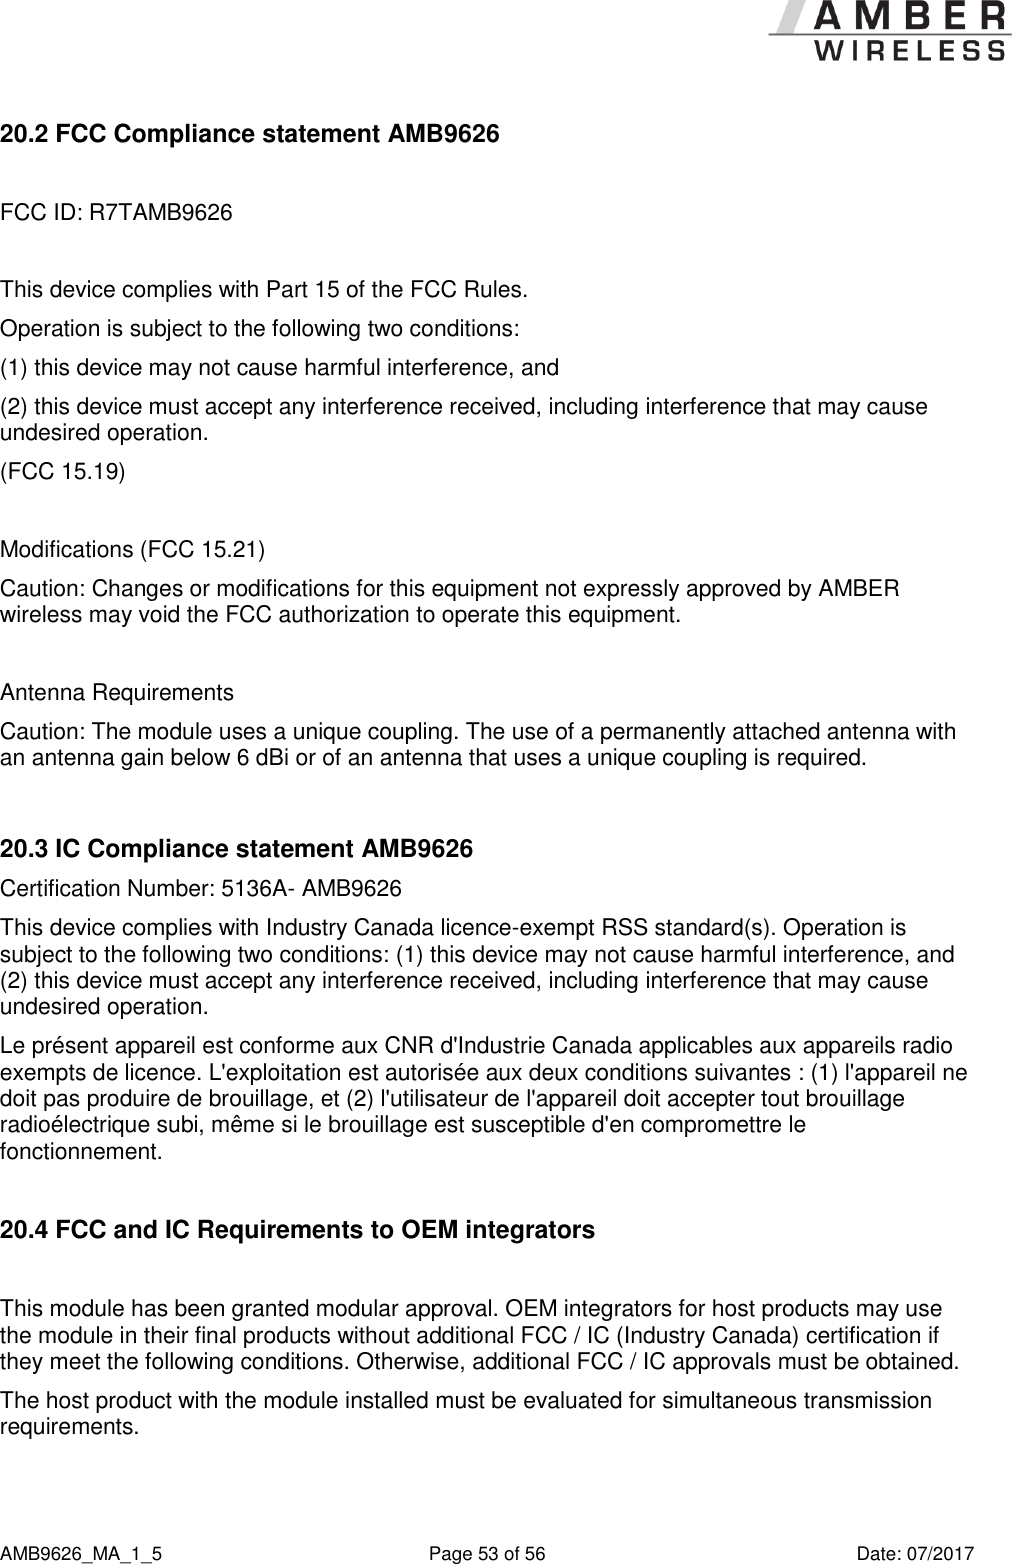      AMB9626_MA_1_5  Page 53 of 56  Date: 07/2017 20.2 FCC Compliance statement AMB9626  FCC ID: R7TAMB9626  This device complies with Part 15 of the FCC Rules.  Operation is subject to the following two conditions:  (1) this device may not cause harmful interference, and  (2) this device must accept any interference received, including interference that may cause undesired operation.  (FCC 15.19)  Modifications (FCC 15.21) Caution: Changes or modifications for this equipment not expressly approved by AMBER wireless may void the FCC authorization to operate this equipment.  Antenna Requirements Caution: The module uses a unique coupling. The use of a permanently attached antenna with an antenna gain below 6 dBi or of an antenna that uses a unique coupling is required.  20.3 IC Compliance statement AMB9626 Certification Number: 5136A- AMB9626 This device complies with Industry Canada licence-exempt RSS standard(s). Operation is subject to the following two conditions: (1) this device may not cause harmful interference, and (2) this device must accept any interference received, including interference that may cause undesired operation. Le présent appareil est conforme aux CNR d&apos;Industrie Canada applicables aux appareils radio exempts de licence. L&apos;exploitation est autorisée aux deux conditions suivantes : (1) l&apos;appareil ne doit pas produire de brouillage, et (2) l&apos;utilisateur de l&apos;appareil doit accepter tout brouillage radioélectrique subi, même si le brouillage est susceptible d&apos;en compromettre le fonctionnement.  20.4 FCC and IC Requirements to OEM integrators  This module has been granted modular approval. OEM integrators for host products may use the module in their final products without additional FCC / IC (Industry Canada) certification if they meet the following conditions. Otherwise, additional FCC / IC approvals must be obtained. The host product with the module installed must be evaluated for simultaneous transmission requirements.  